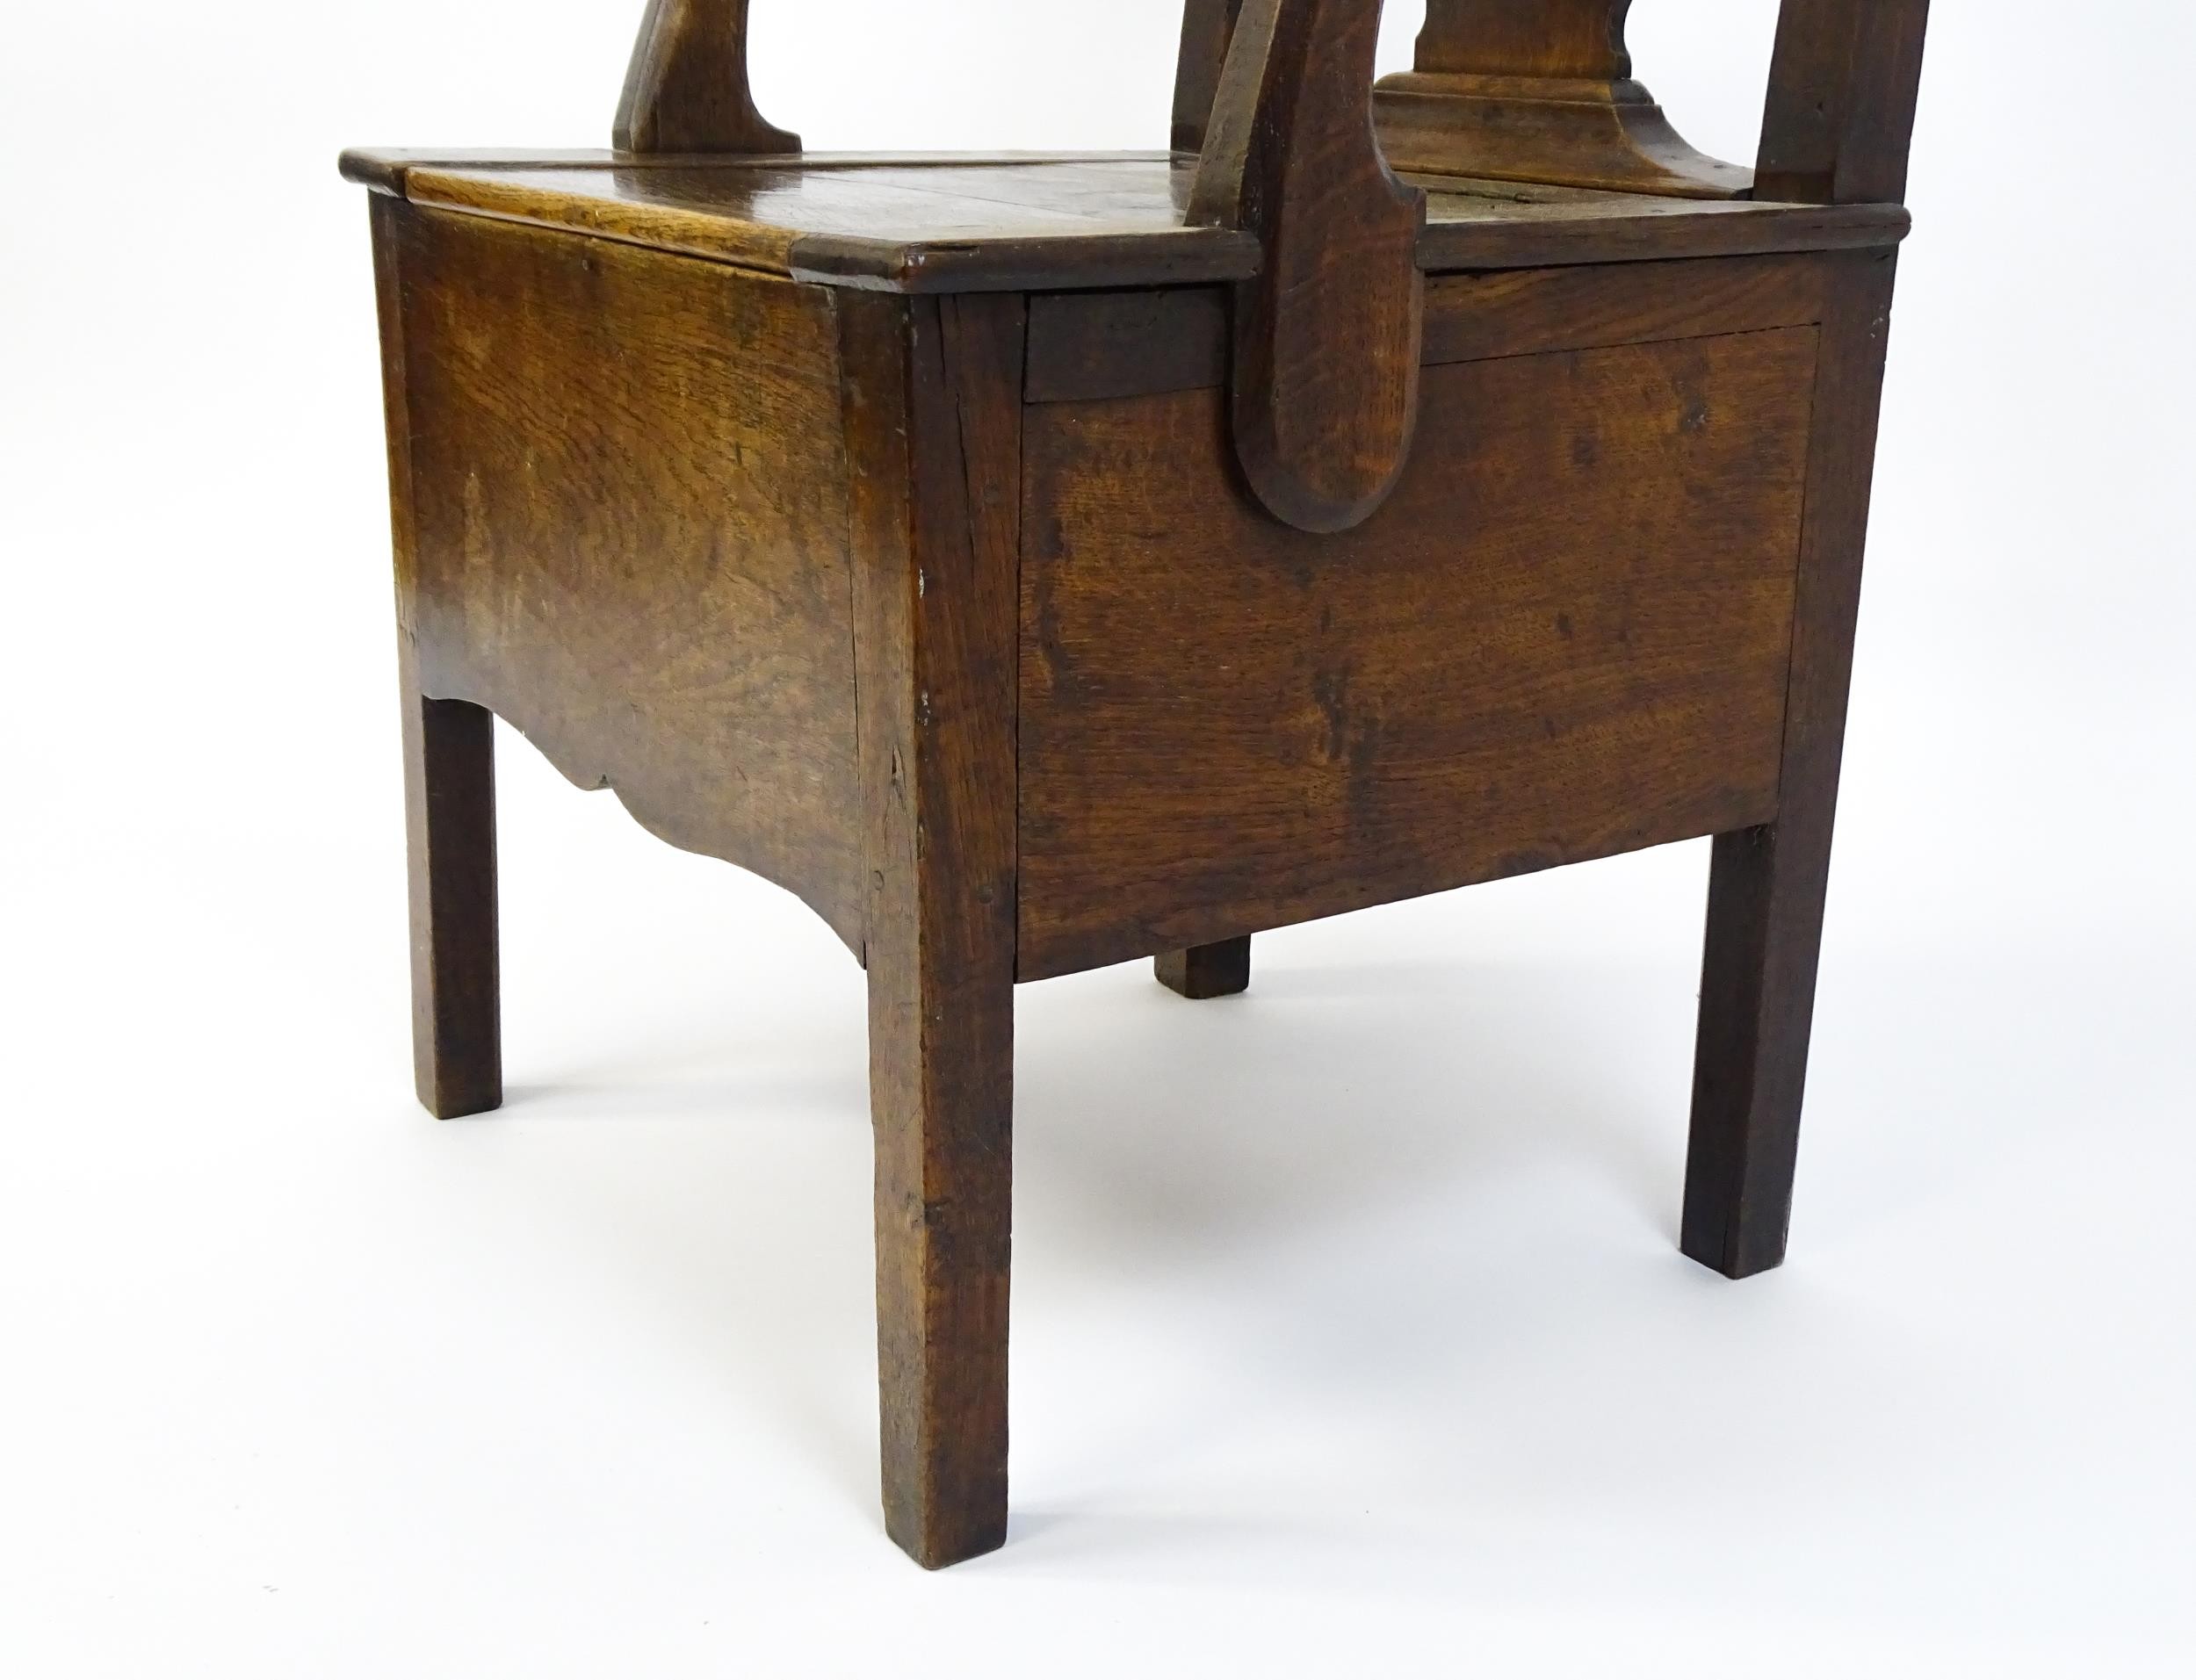 A late Georgian oak commode chair with a Chippendale style back splat above a hinged seat opening to - Image 8 of 10